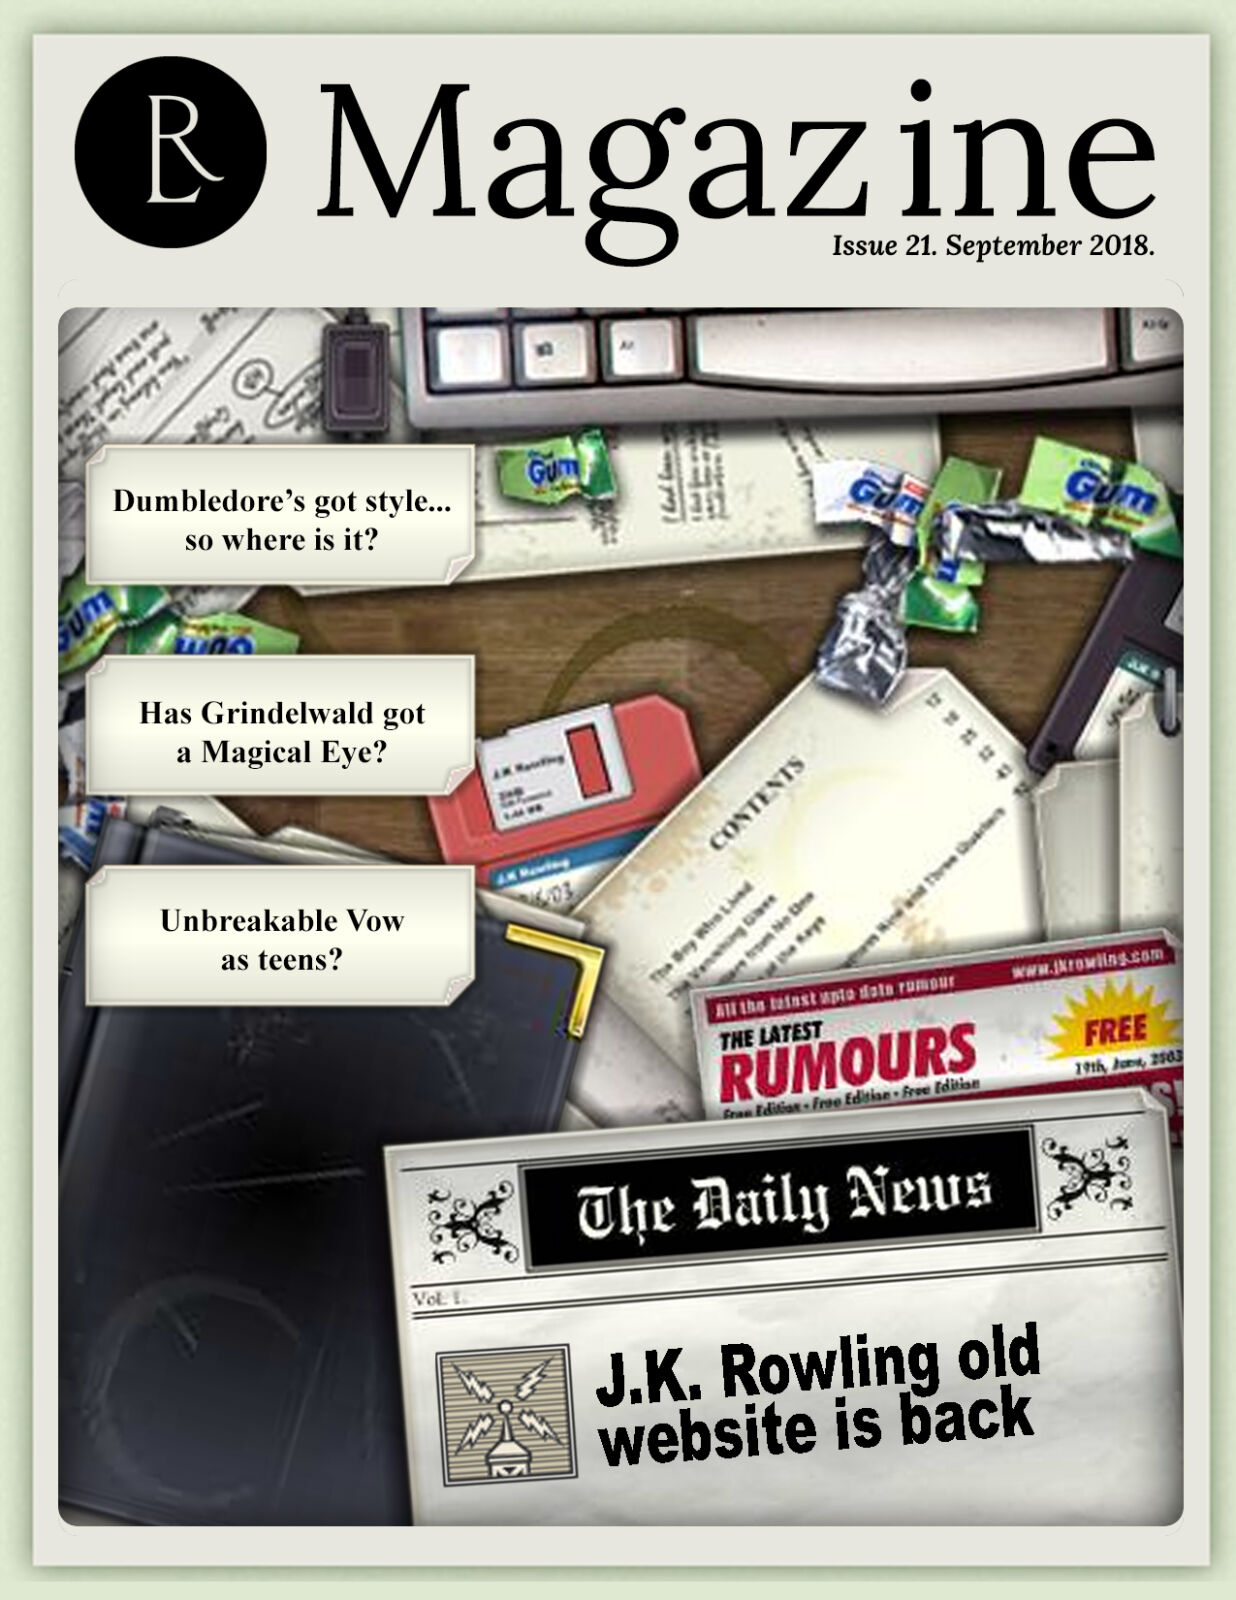 The Rowling Library Magazine #21 (September 2018): J.K. Rowling's old website is back